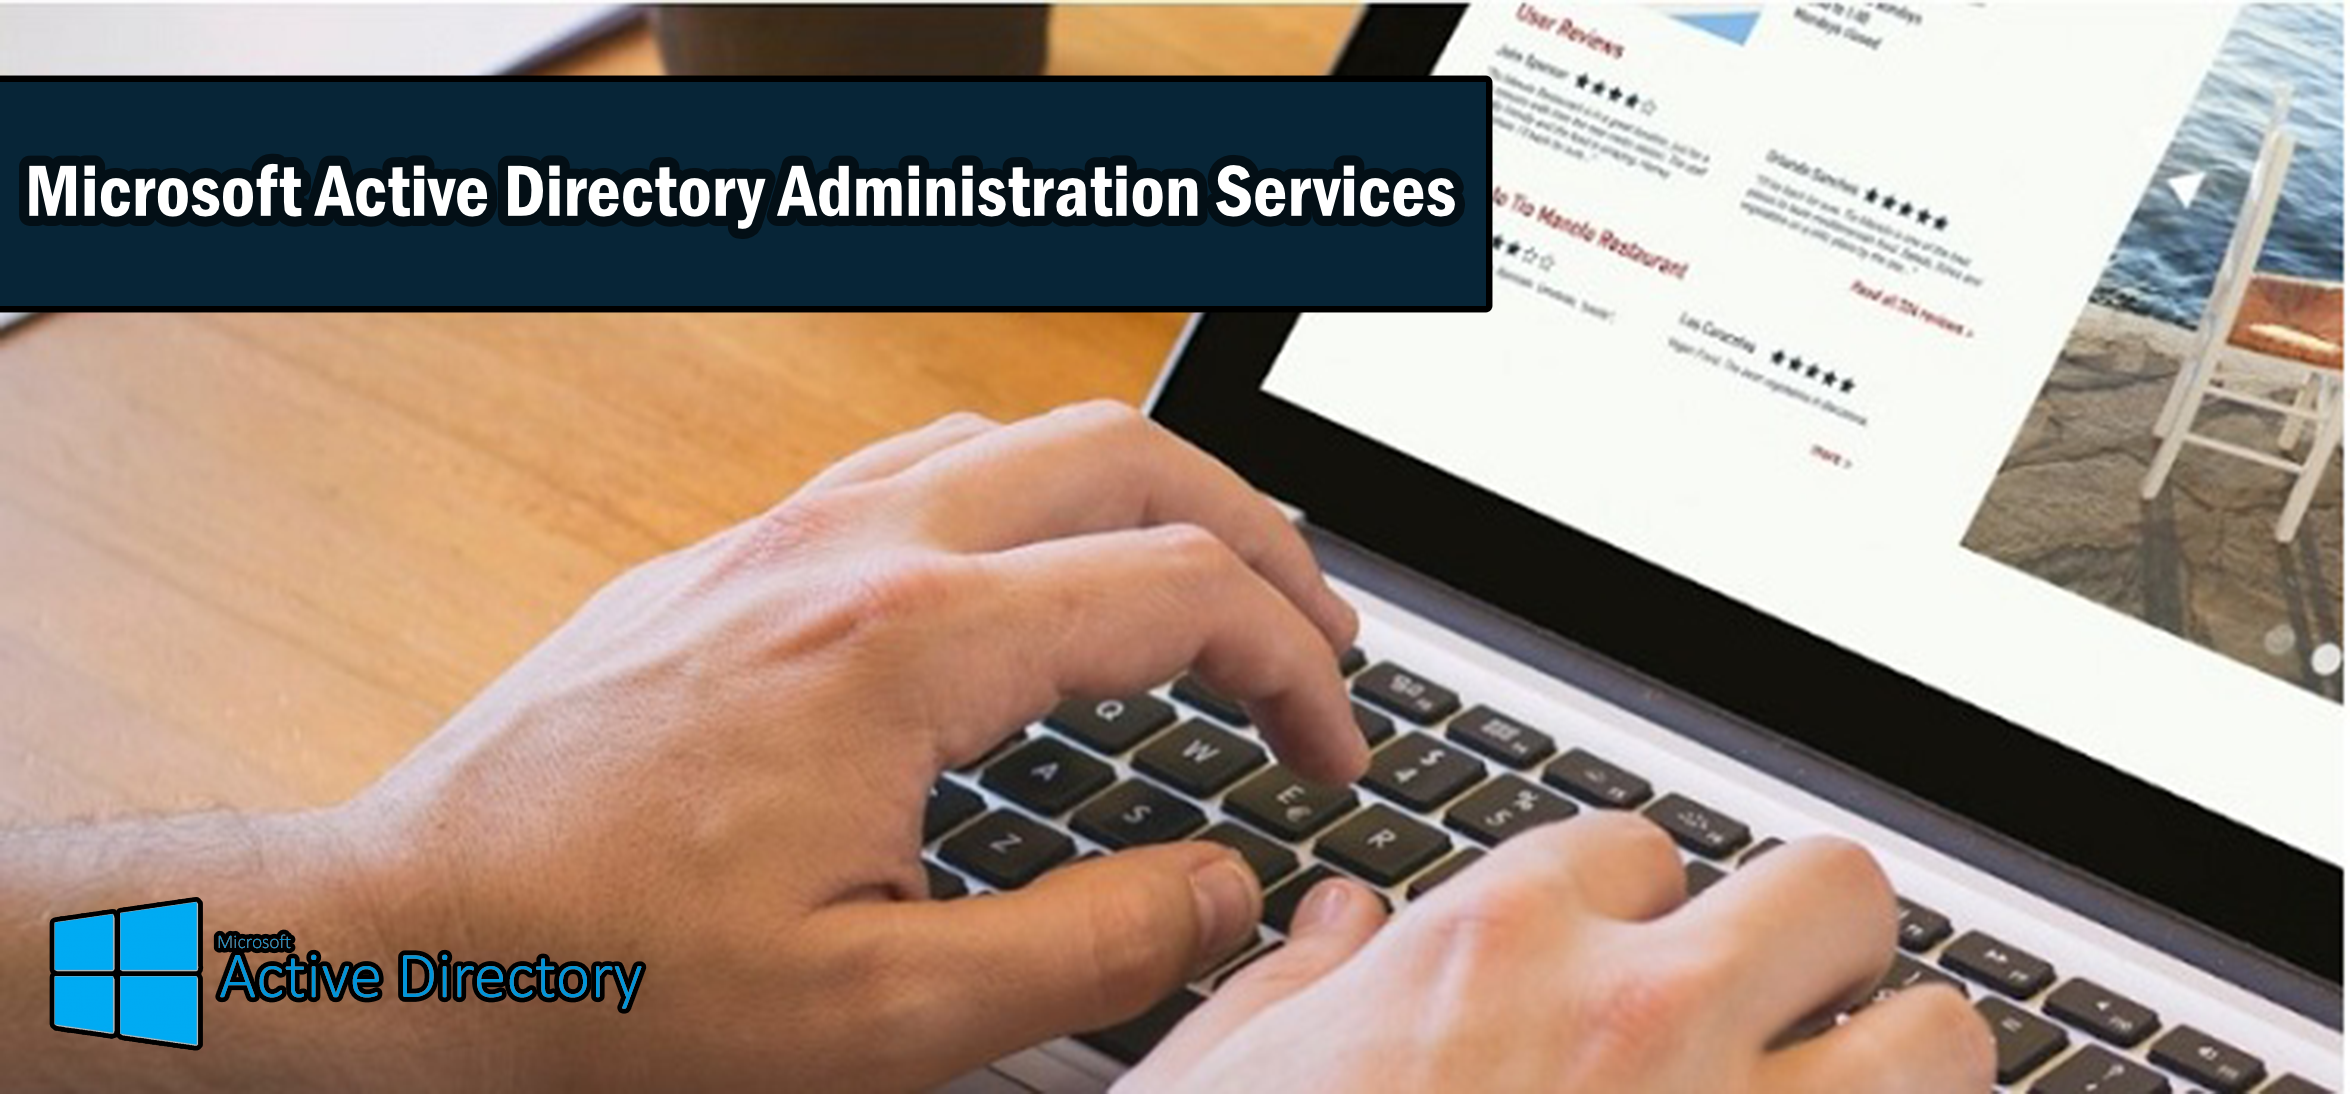 Microsoft Active Directory Administration Services in Kearny NJ, 07032